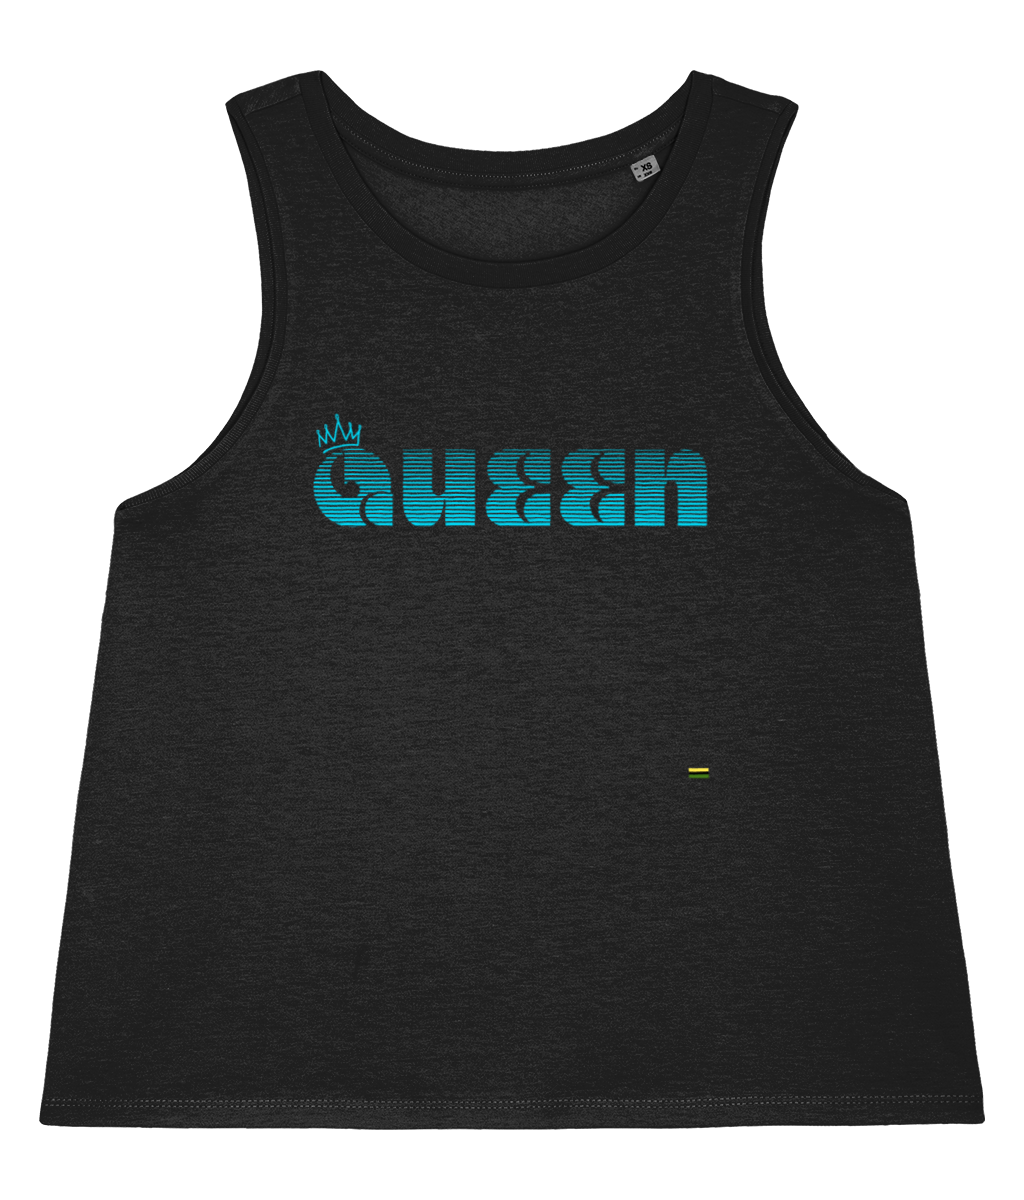 Queen Crown Organic Cotton Cropped Tank Top